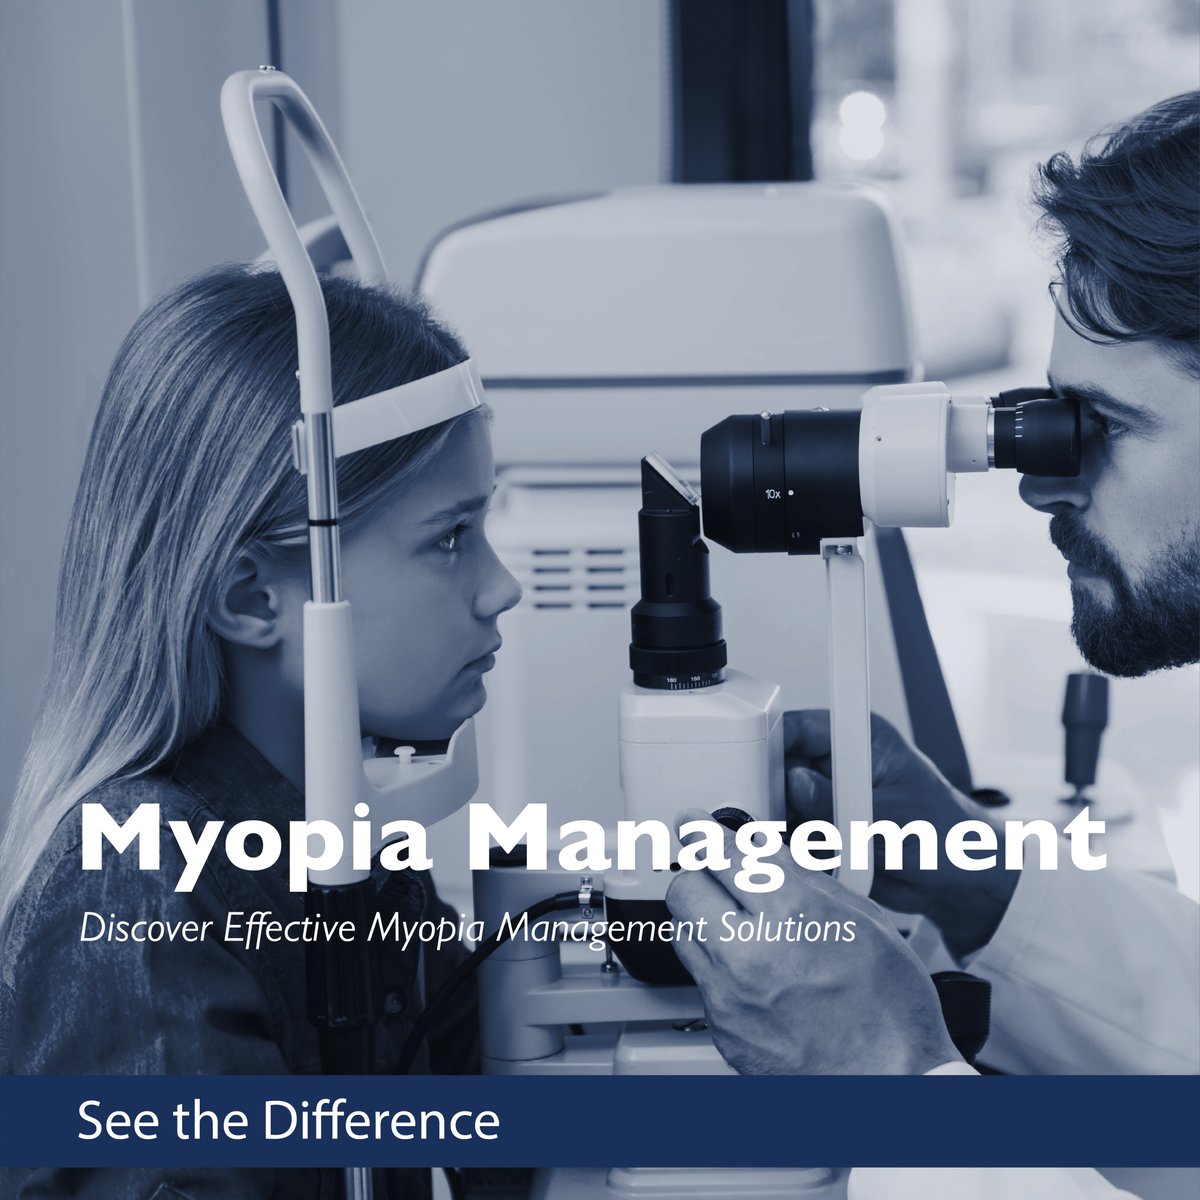 We are on a mission to empower you in your eye care journey! Myopia management isn’t just about correcting vision – it’s about nurturing eye health for a lifetime of clear sight. 🌟

Myopia Management Clinic: houstoneye.com/services/myopi…

#EyeCare #WeCare #SeeTheDifference